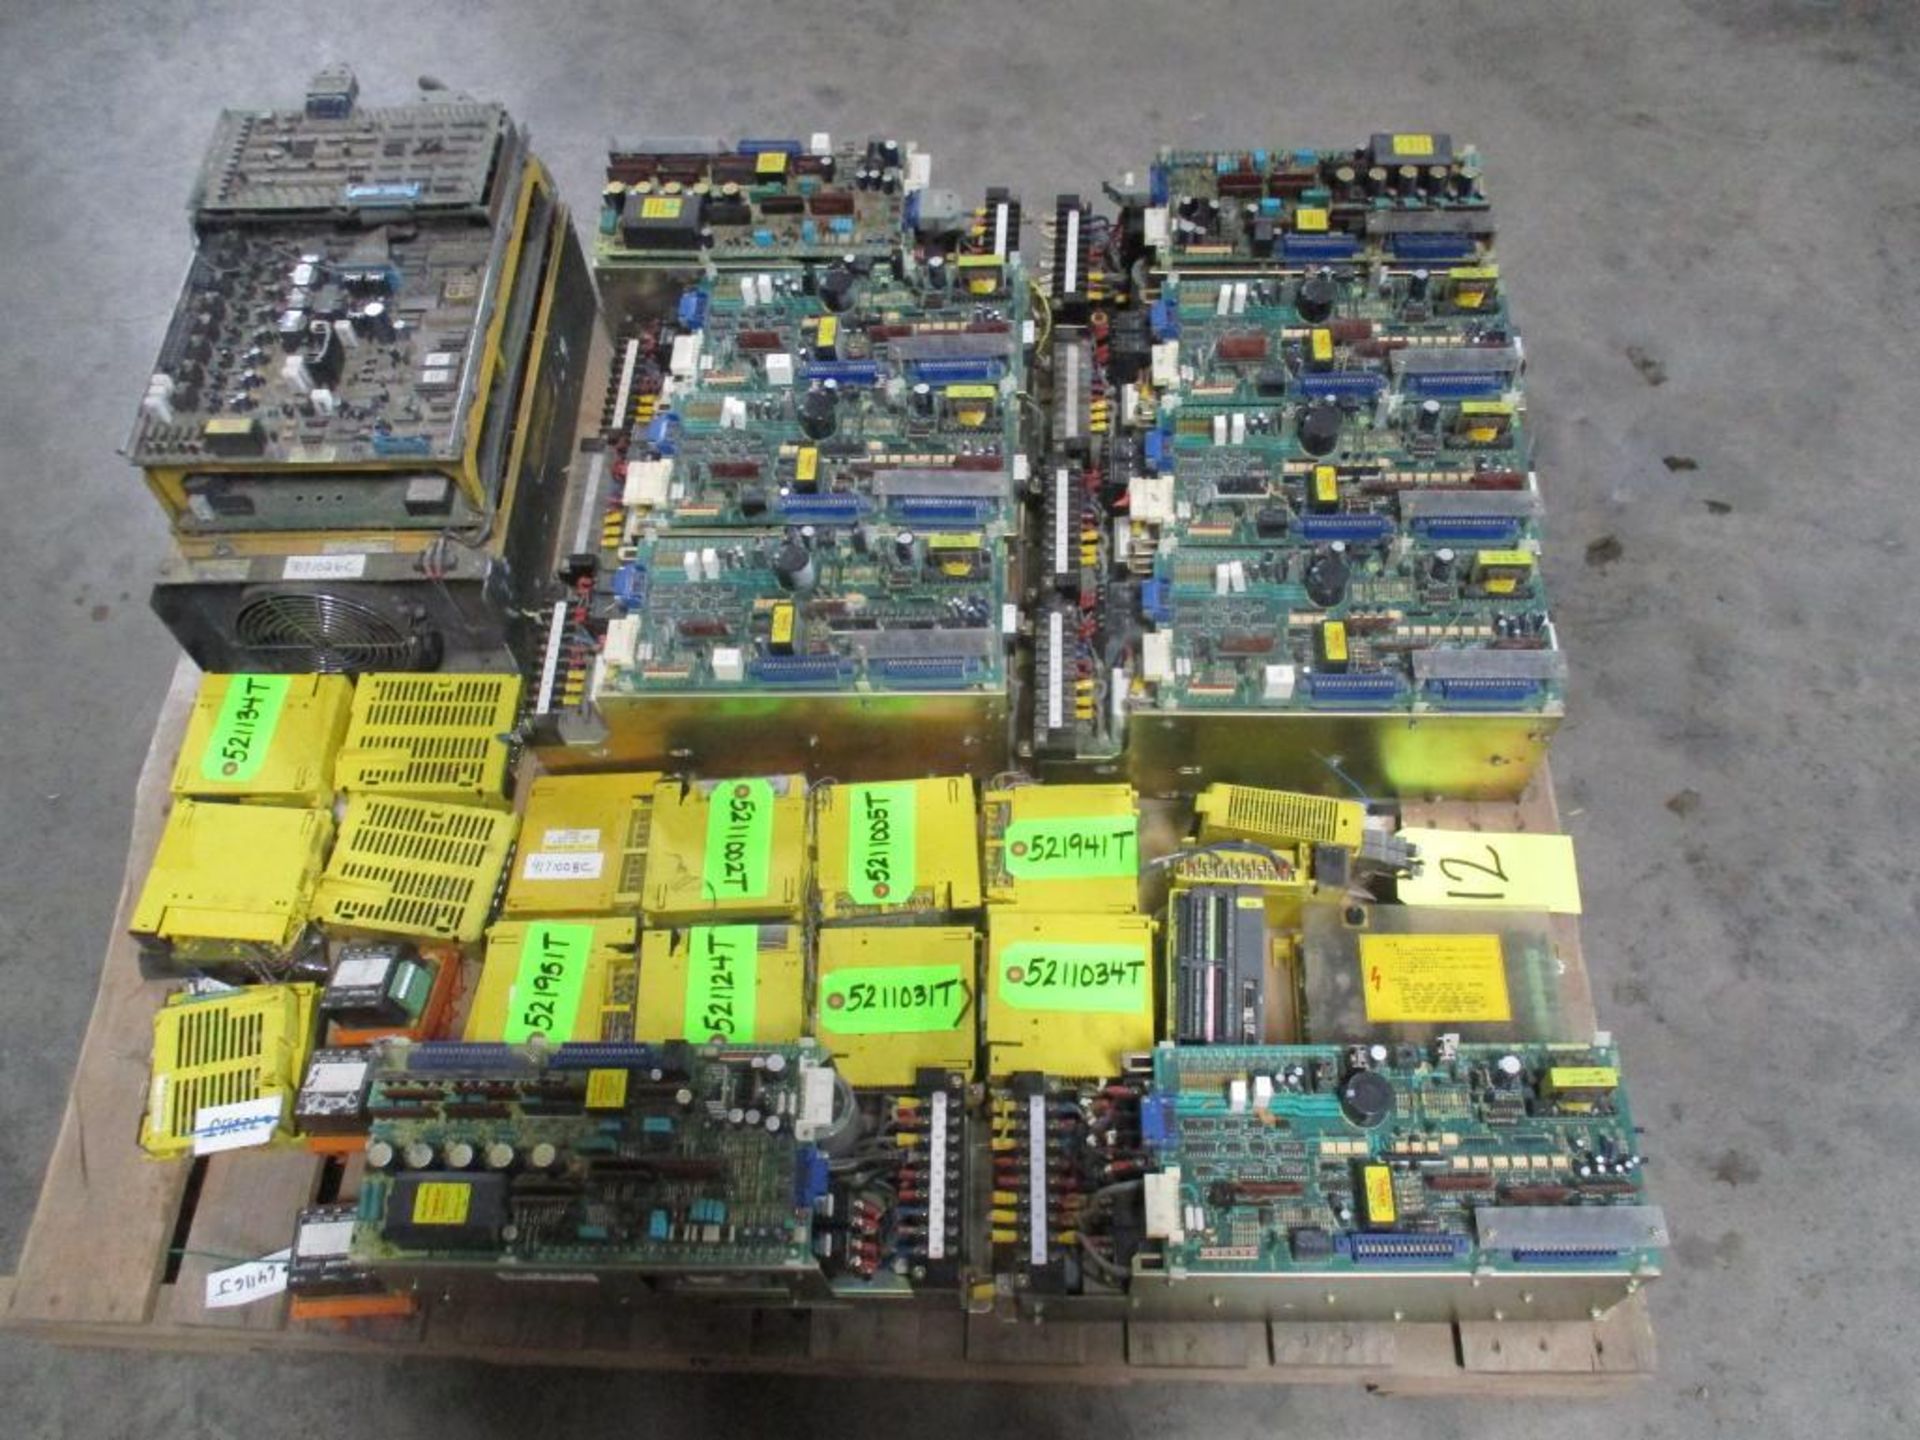 Misc. Fanuc Parts & Drives, Fanuc Drives, & Cards - Image 2 of 2